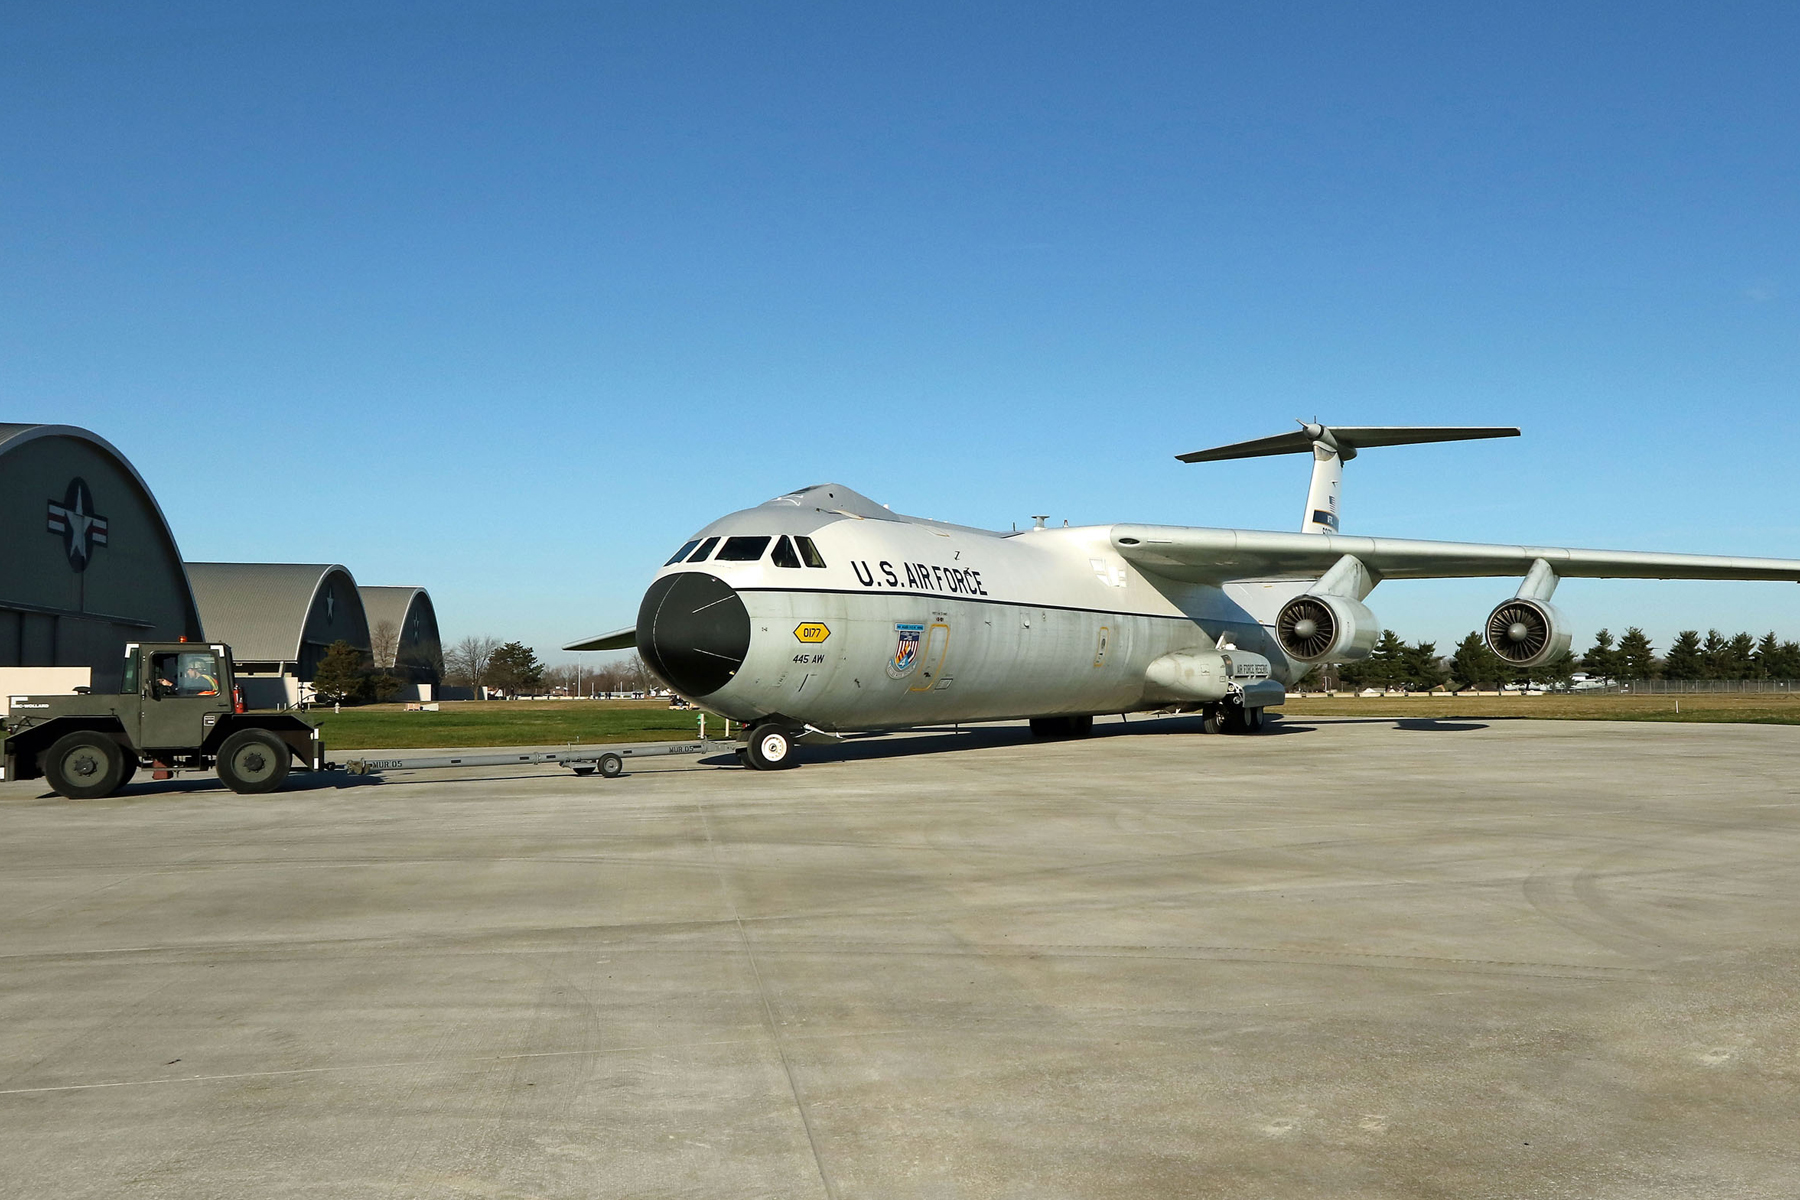 Restoration staff move the Lockheed C-141C Hanoi Taxi into the new fourth building at the National Museum of the U.S. Air Force on Dec. 16, 2015. (U.S. Air Force photo by Don Popp)